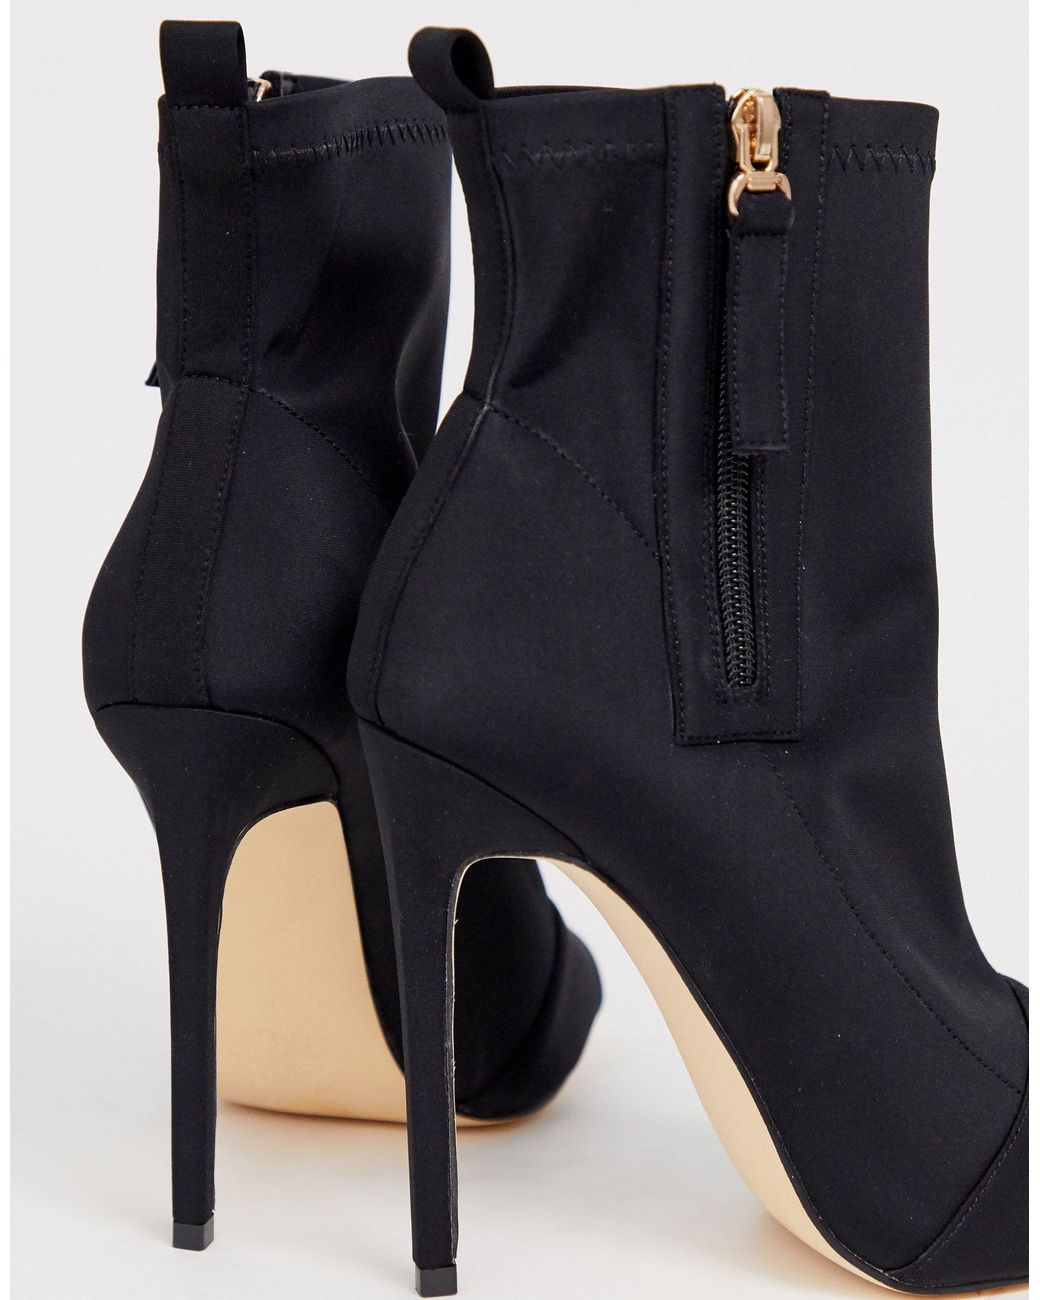 Simmi London Wide Fit Jacques ruched knee boots in black | ASOS